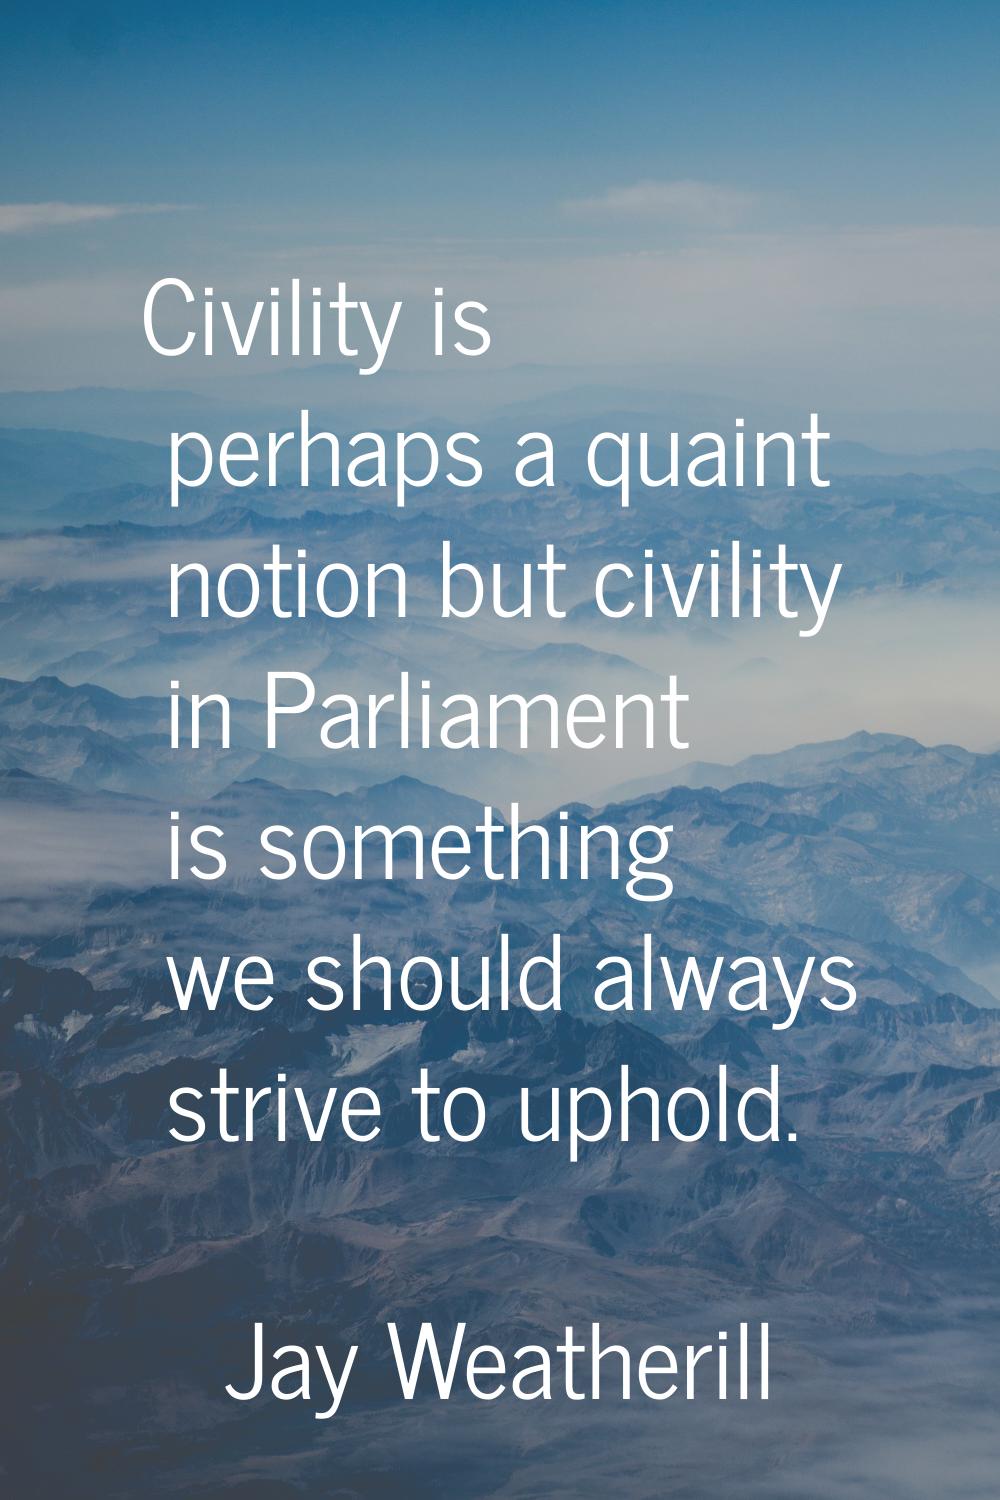 Civility is perhaps a quaint notion but civility in Parliament is something we should always strive